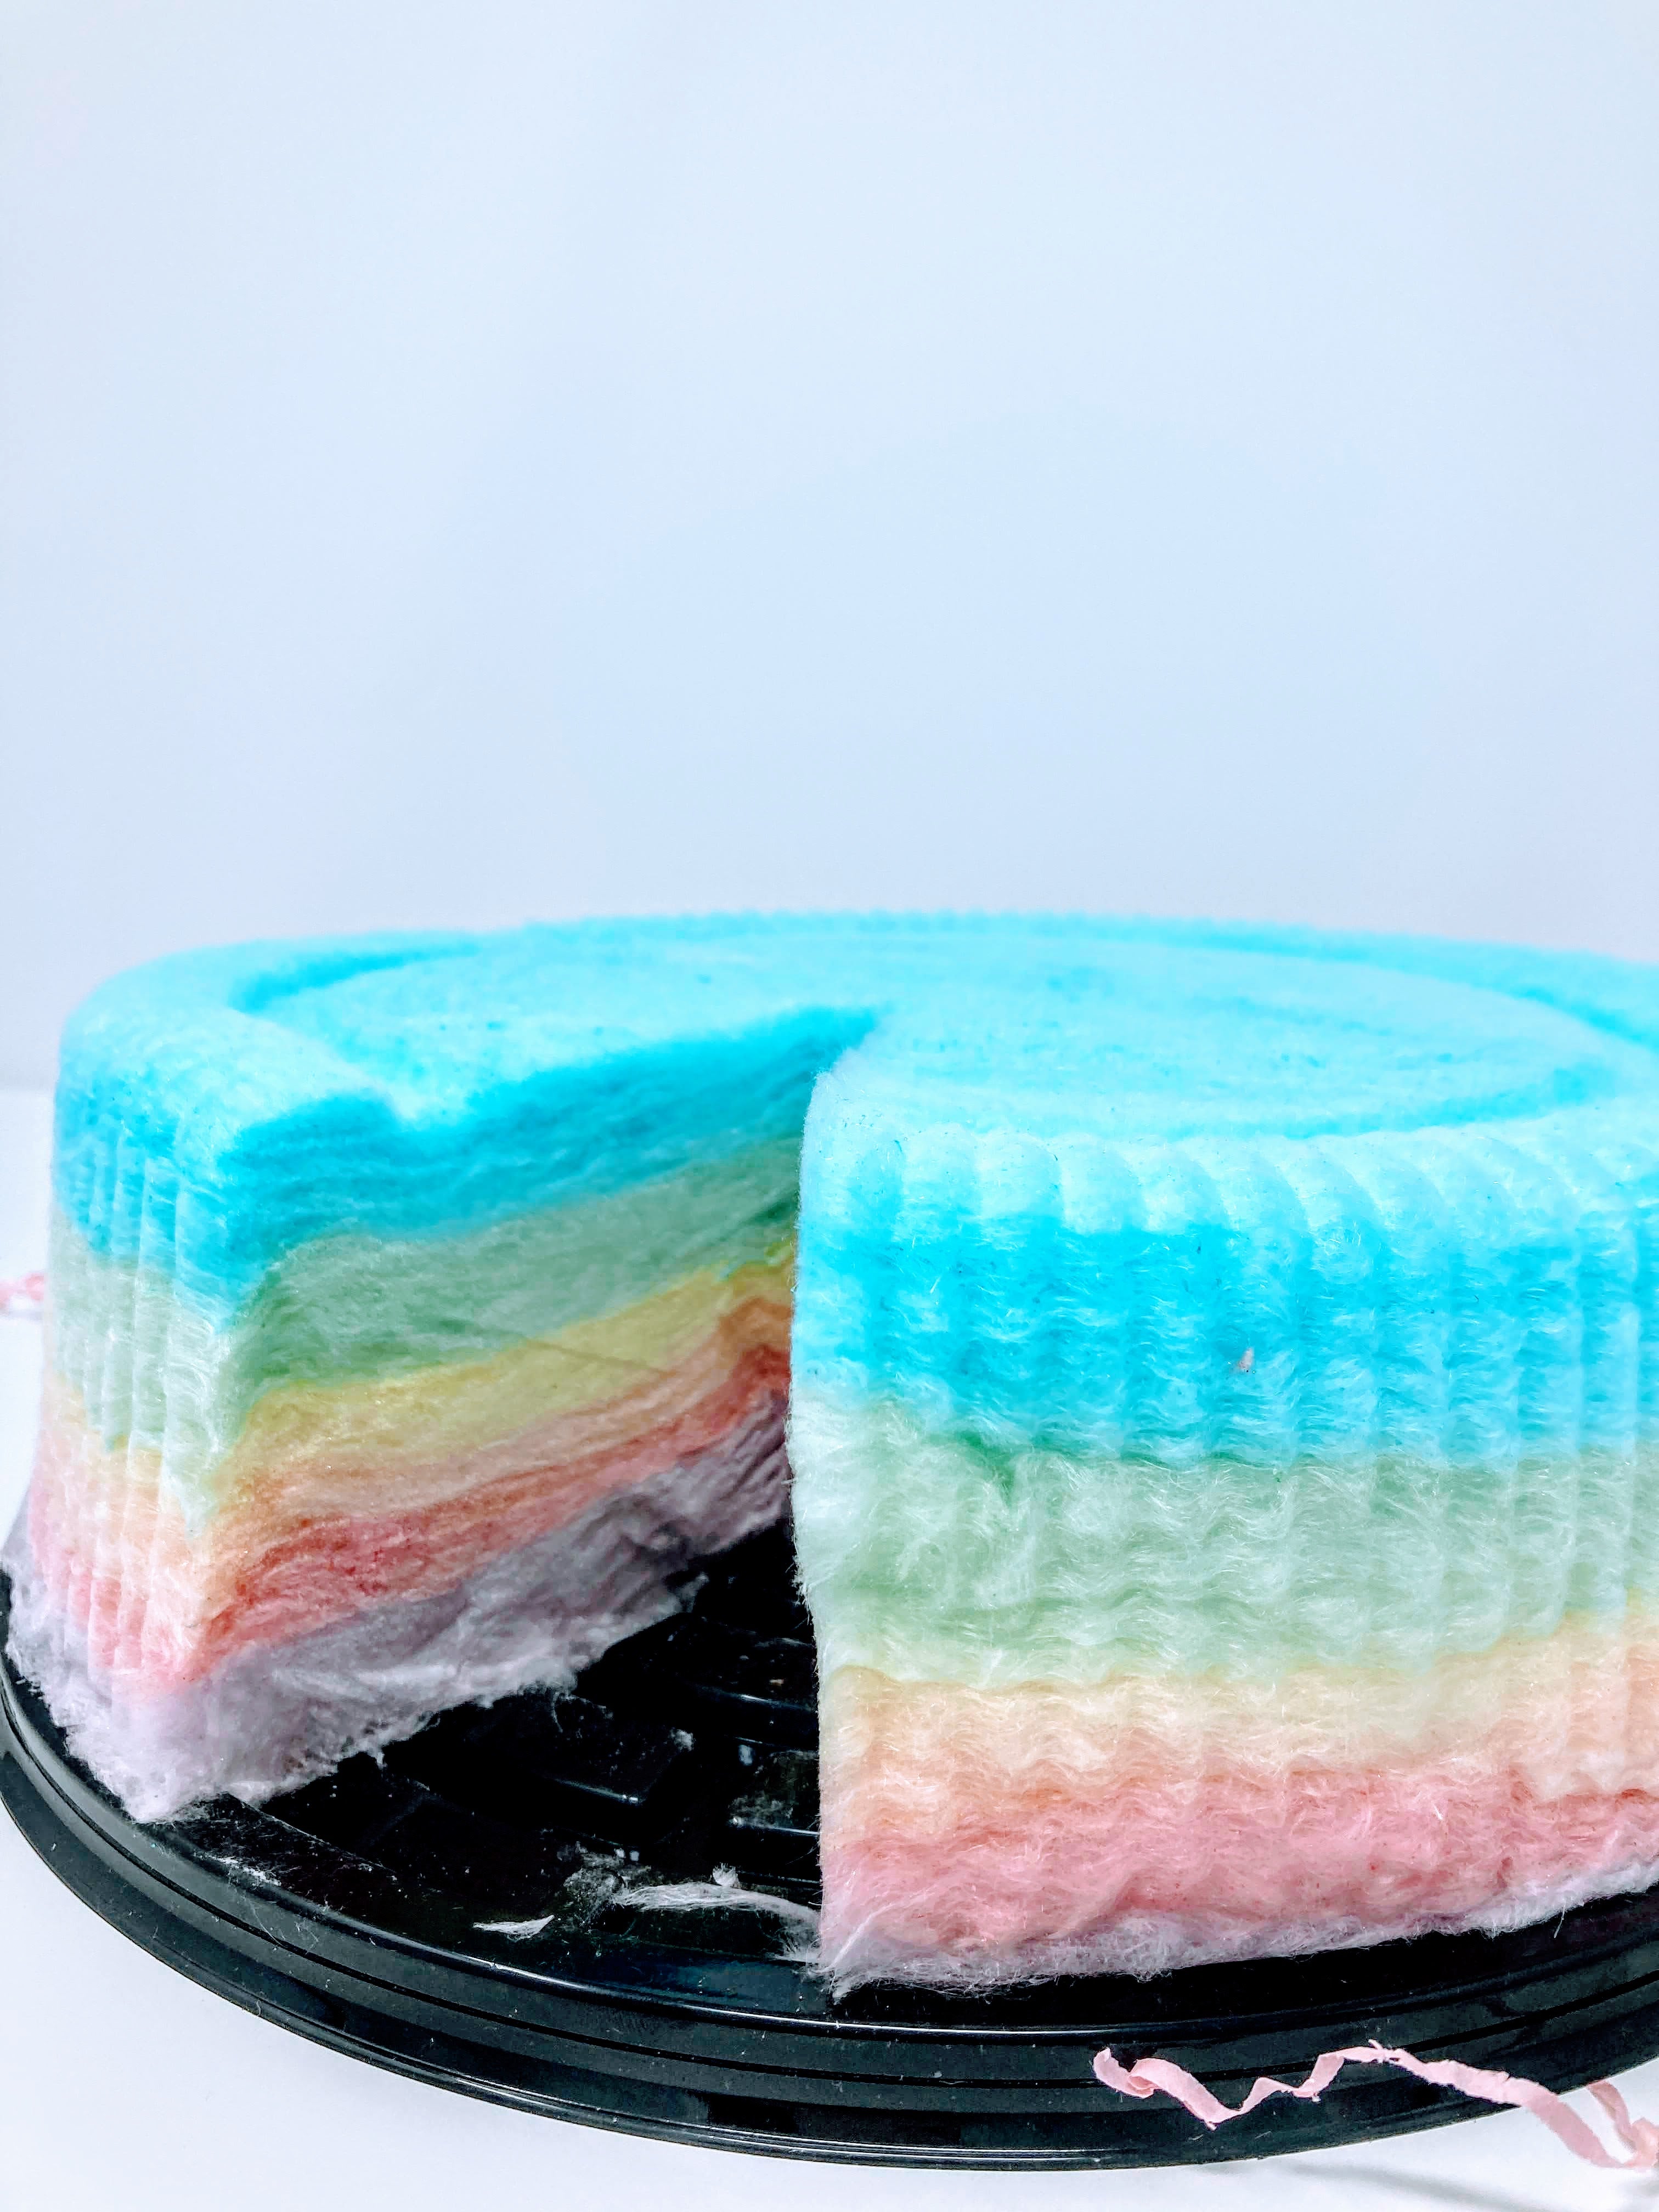 Cotton Candy Layer Cake - The Cake Chica